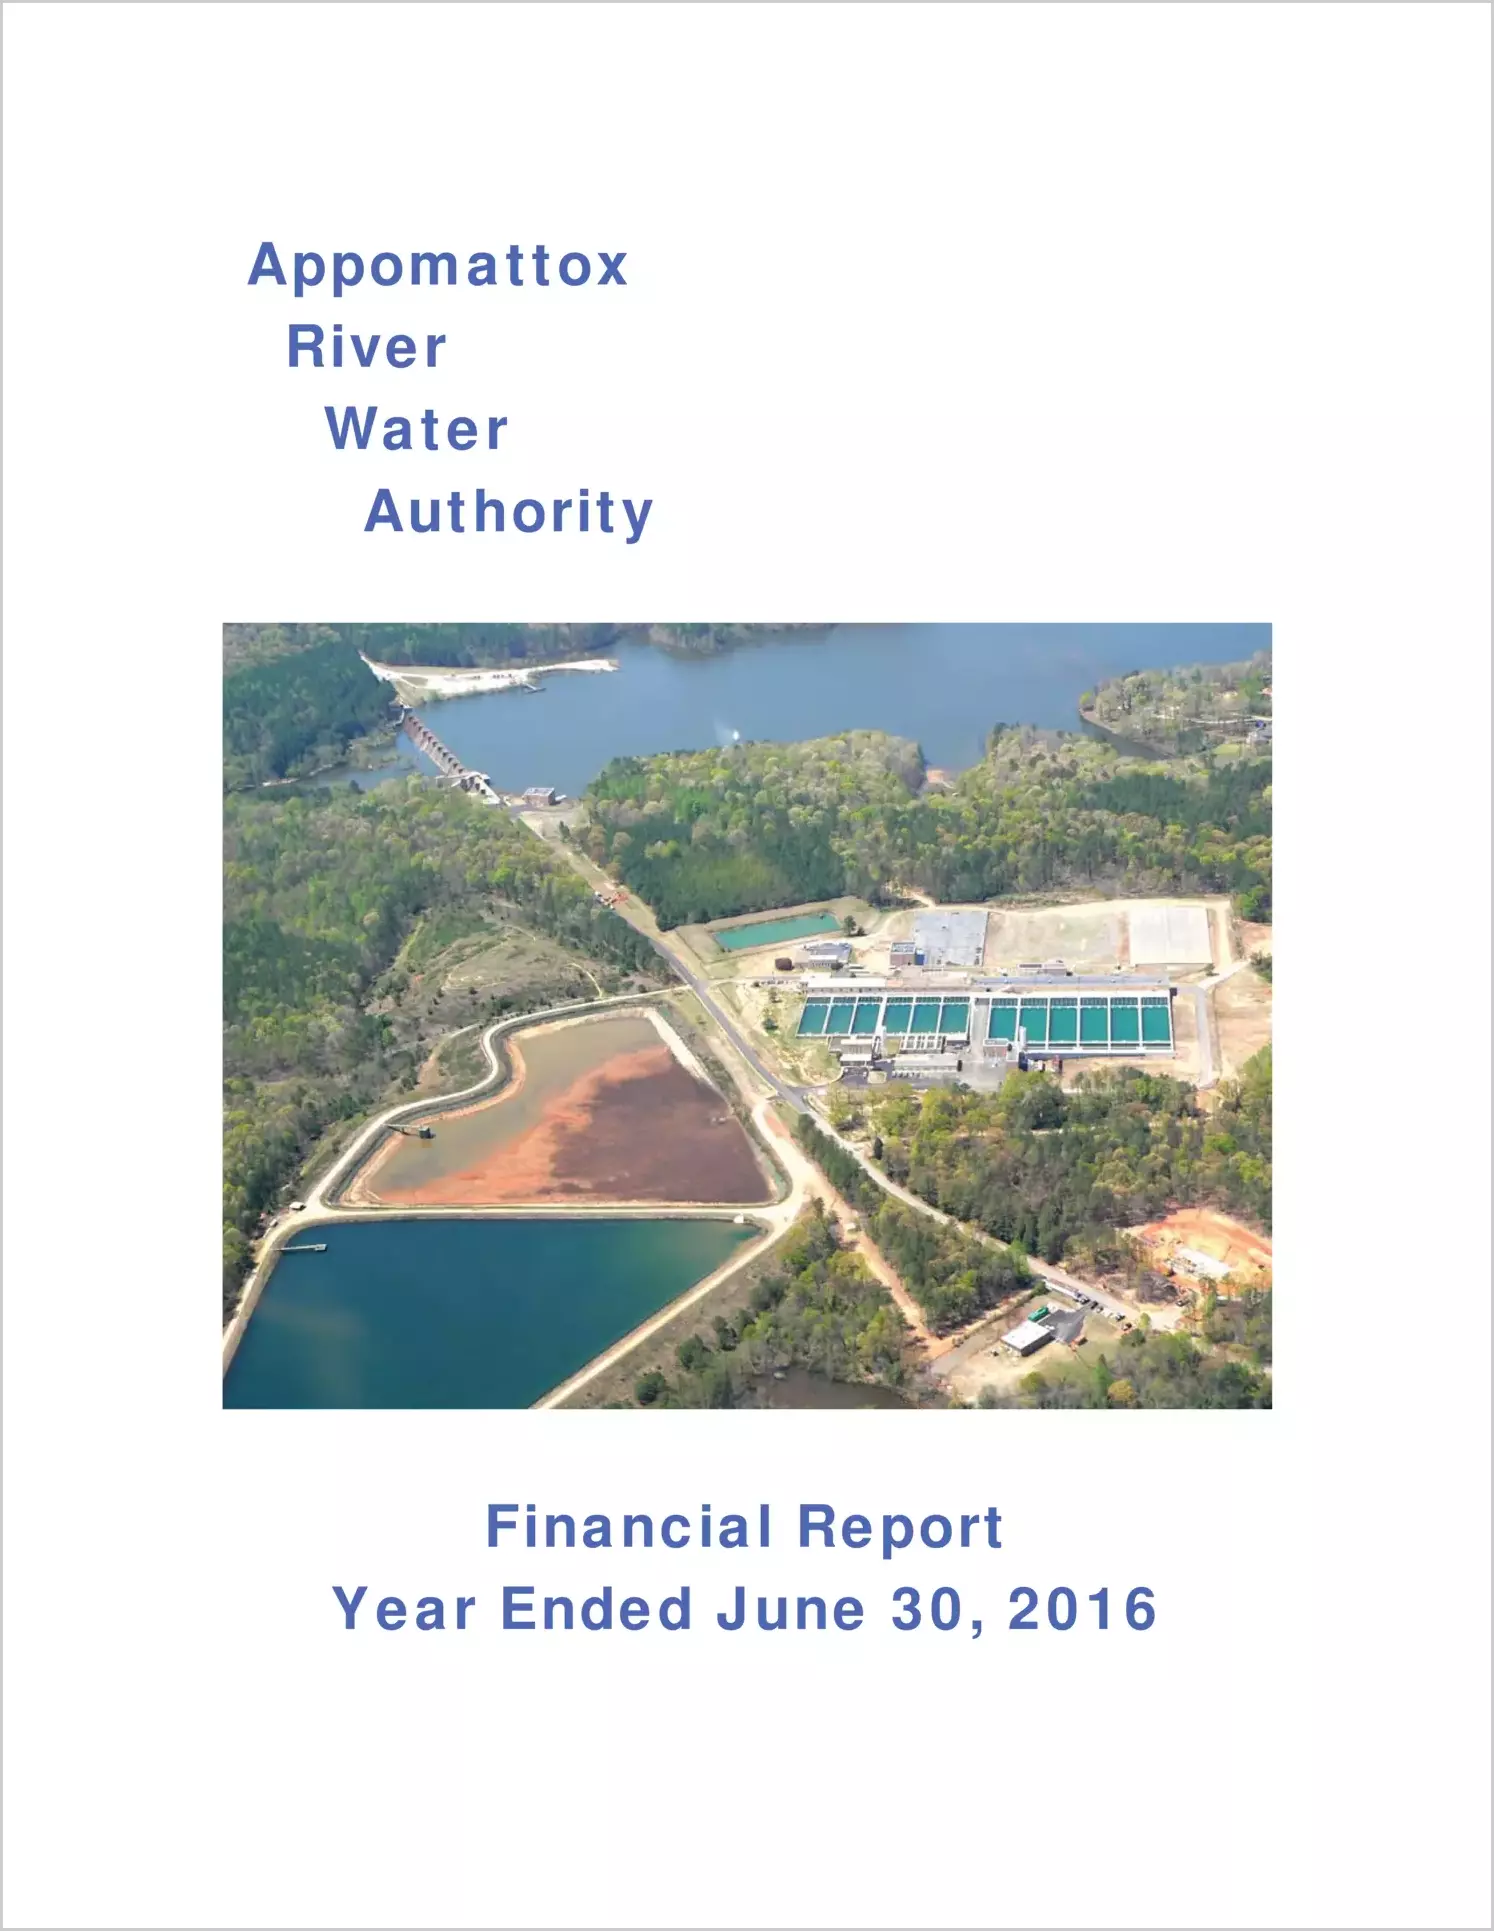 2016 ABC/Other Annual Financial Report  for Appomattox River Water Authority